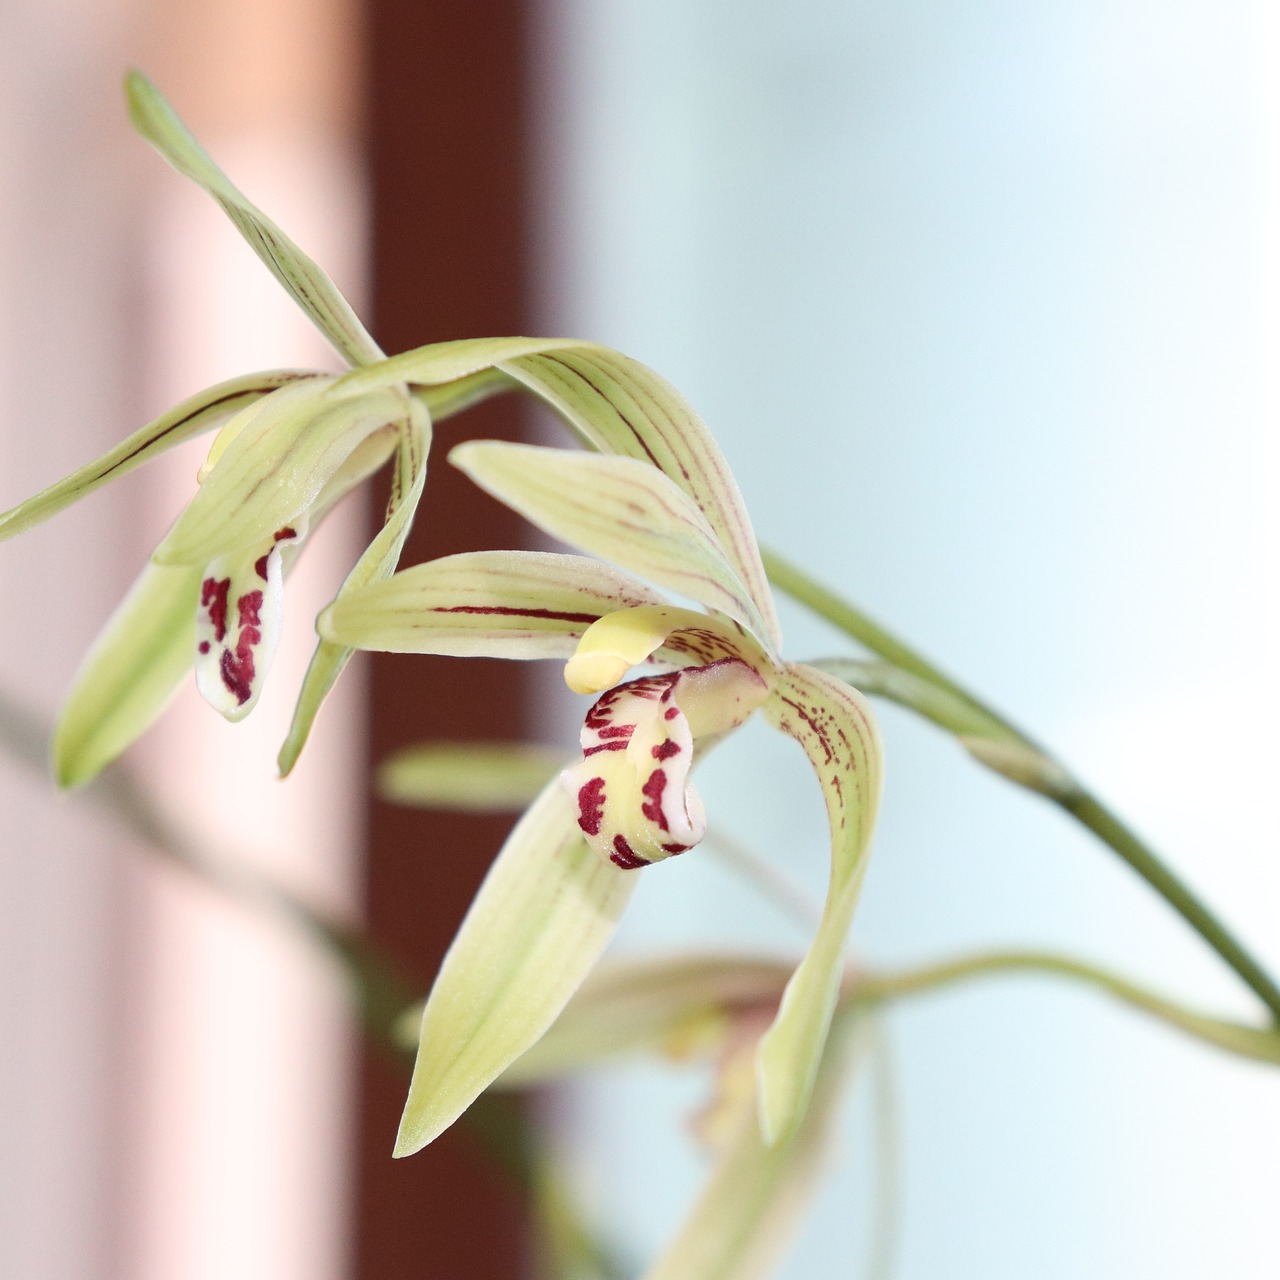 orchid flower white free photo